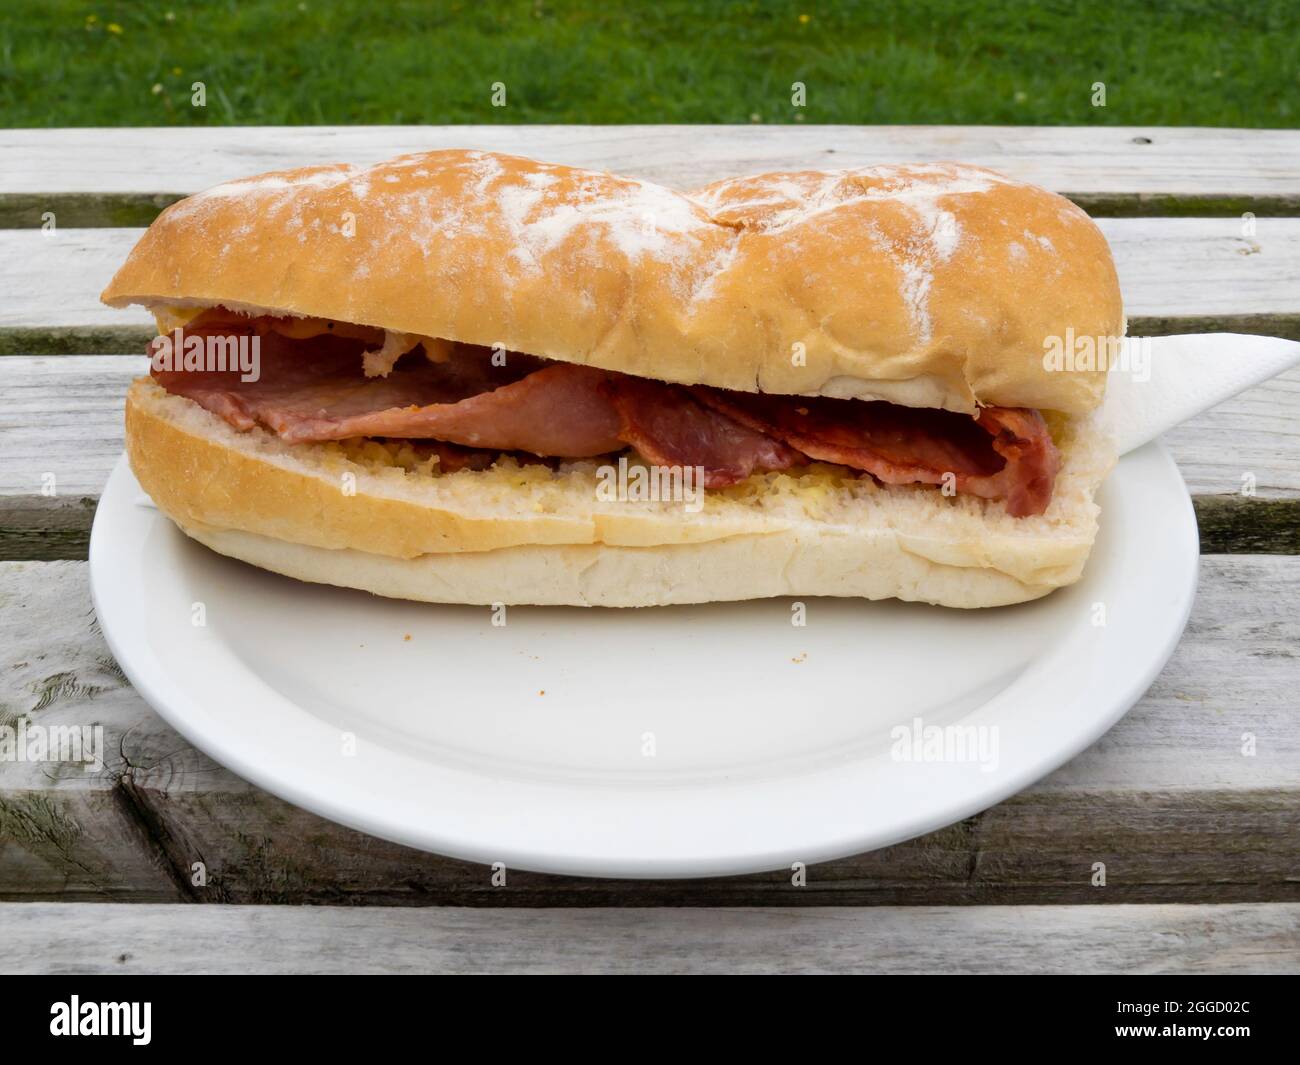 Lunchtime snack on an outside table Bacon in a soft white Roll Stock Photo